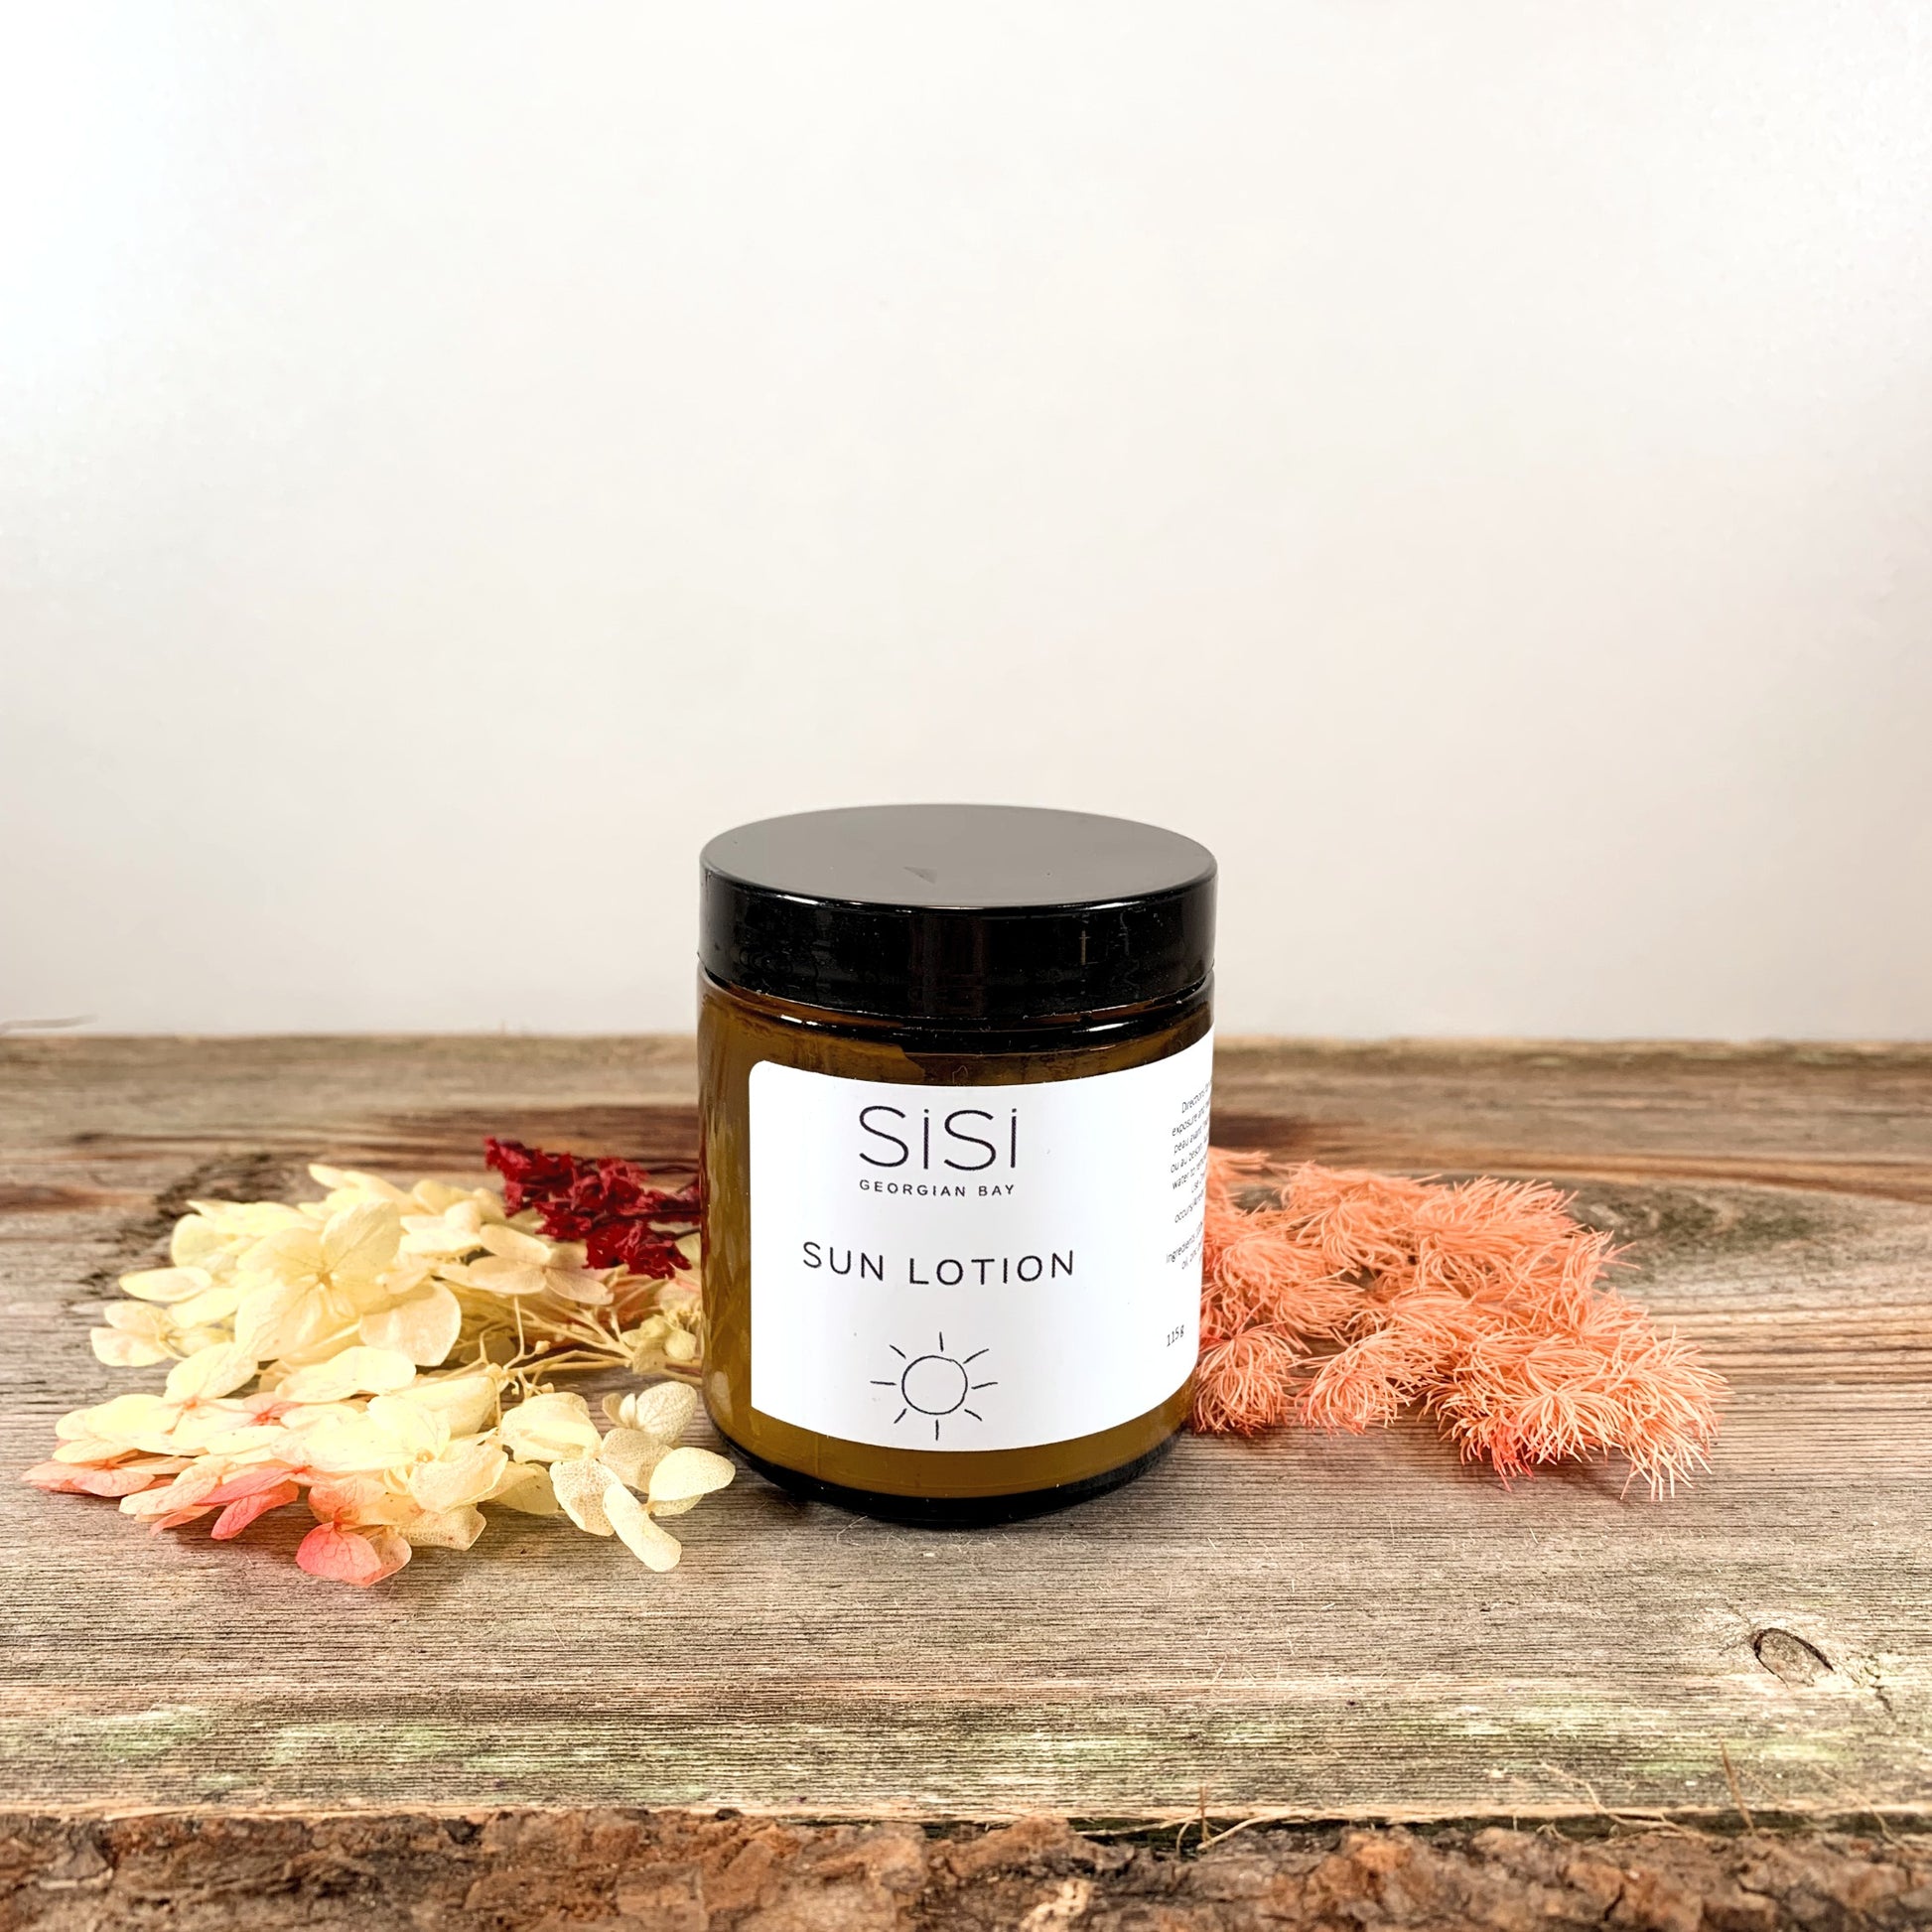 Natural skincare products - Natural Sun Protection - SiSi Georgian Bay Sun Lotion in an amber glass jar on a rustic wooden surface with pretty colourful flowers spread out around it